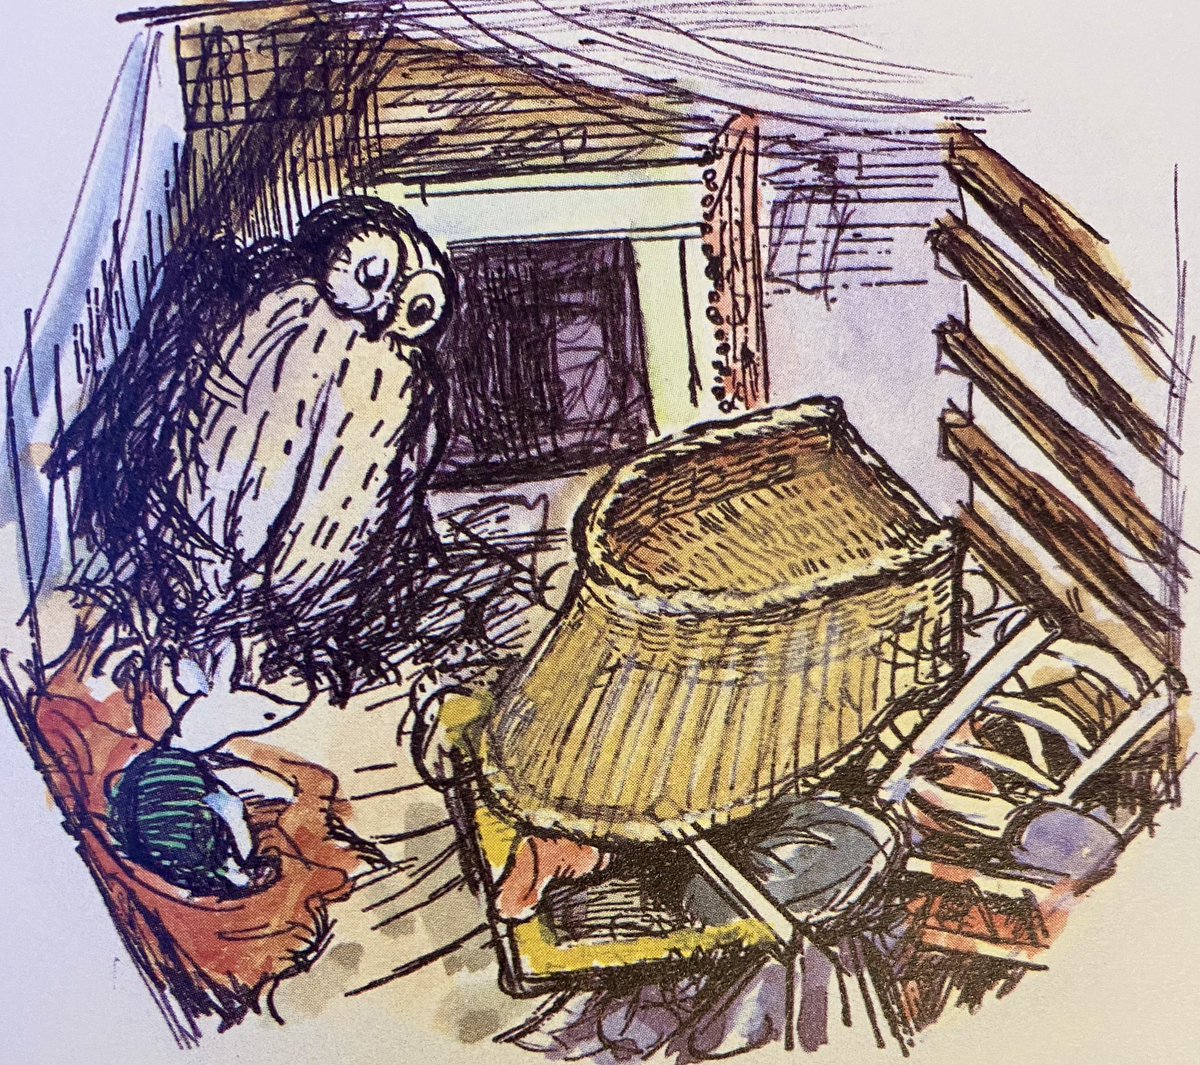 “I’m face downwards under something,” said Pooh. Owl frowned at as much of Pooh as he could see. “Pooh, did YOU do that?” “No,” said Pooh humbly. “I don’t THINK so.” “Then who did?” “I think it was the wind,” said Piglet. “I think your house has blown down.” ~A.A.Milne #storm